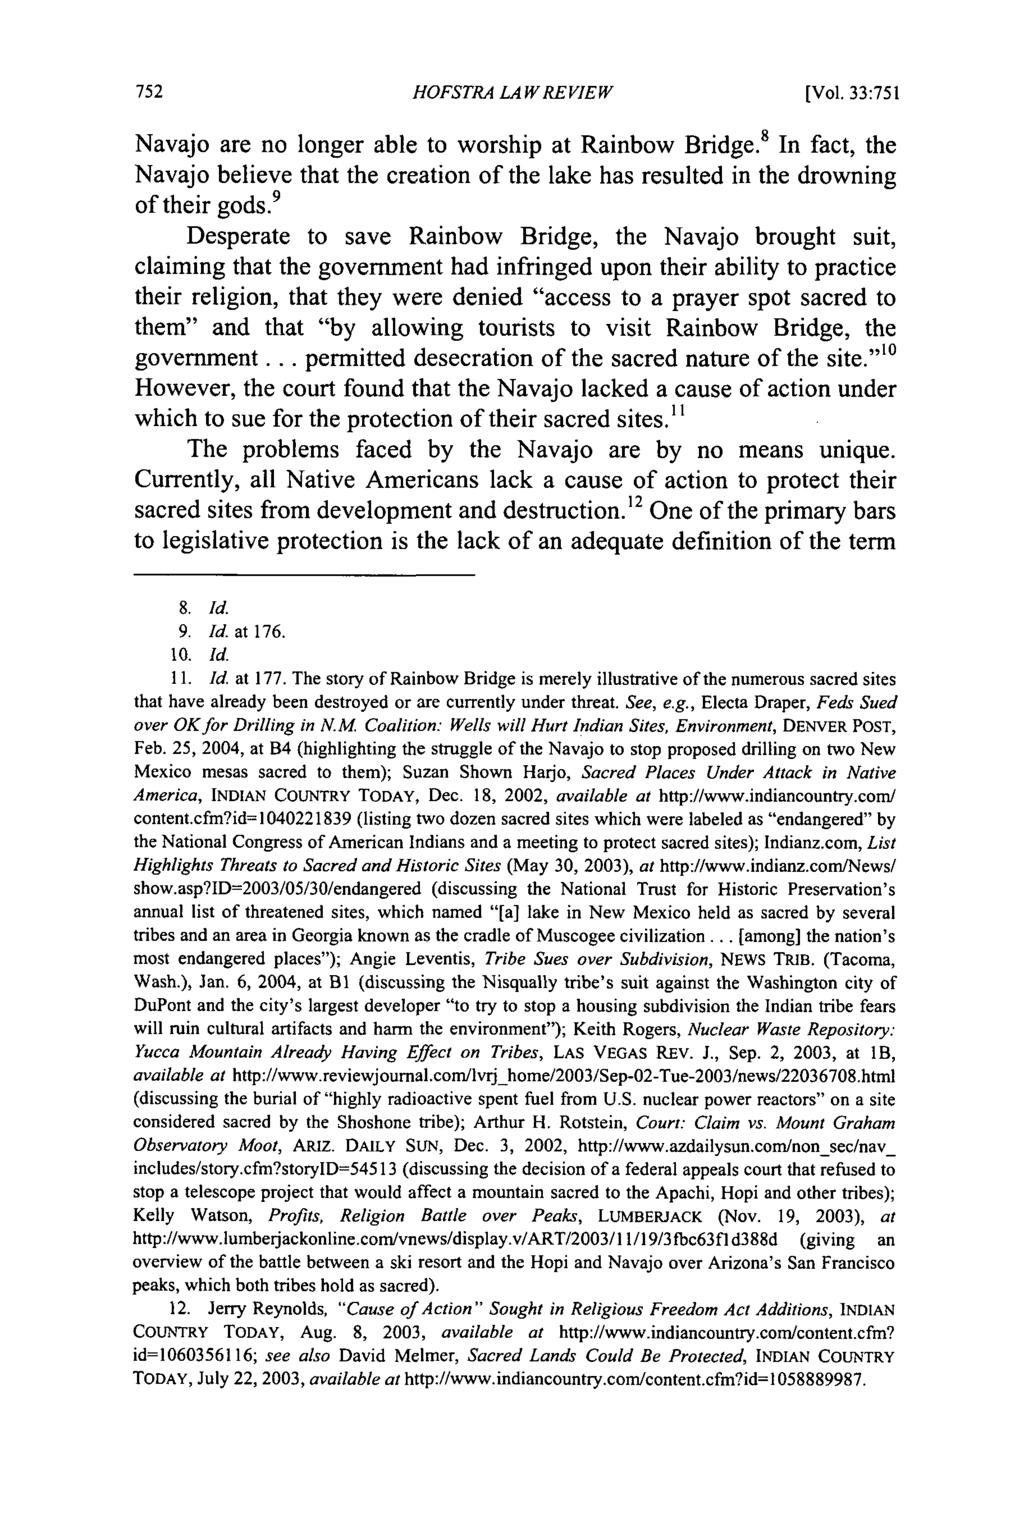 Hofstra Law Review, Vol. 33, Iss. 2 [2004], Art. 9 HOFSTRA LAW REVIEW [Vol. 33:751 Navajo are no longer able to worship at Rainbow Bridge.